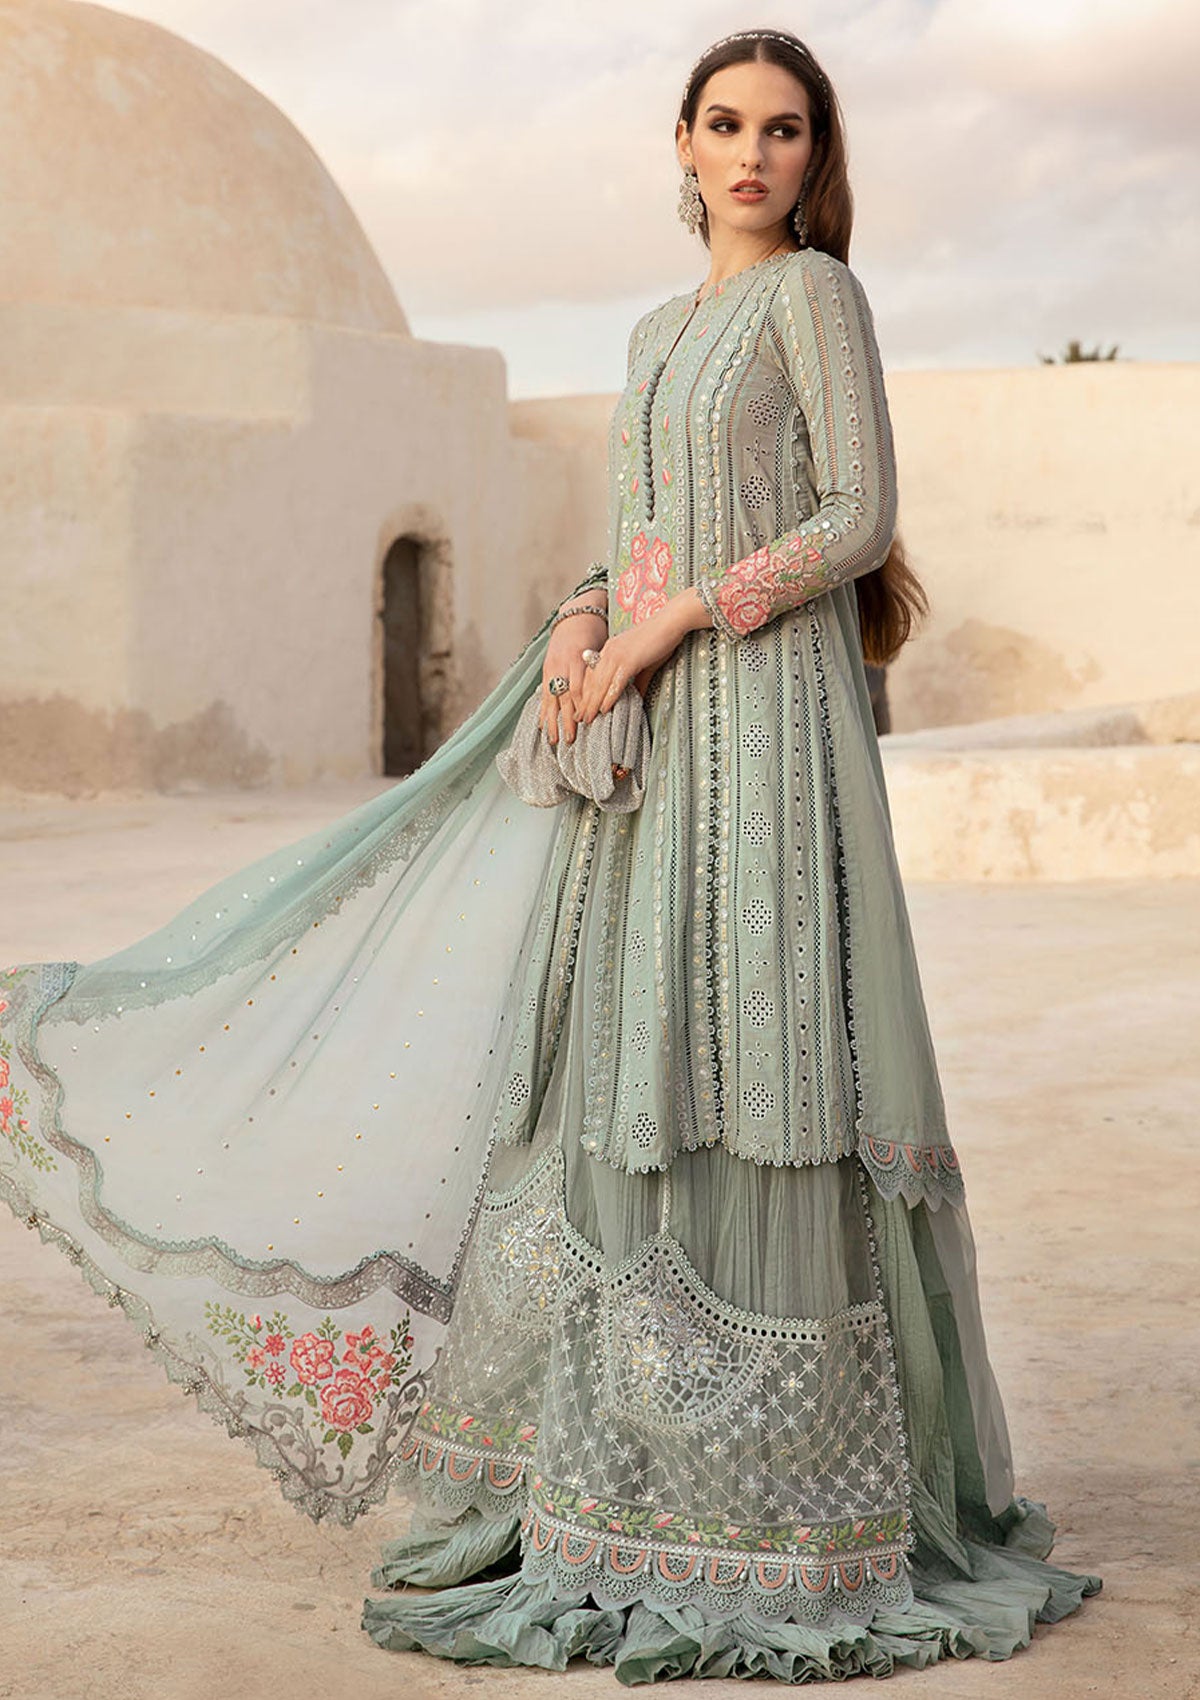 Lawn Collection - Maria B - Voyage a'Luxe - Luxury - MB24#12B